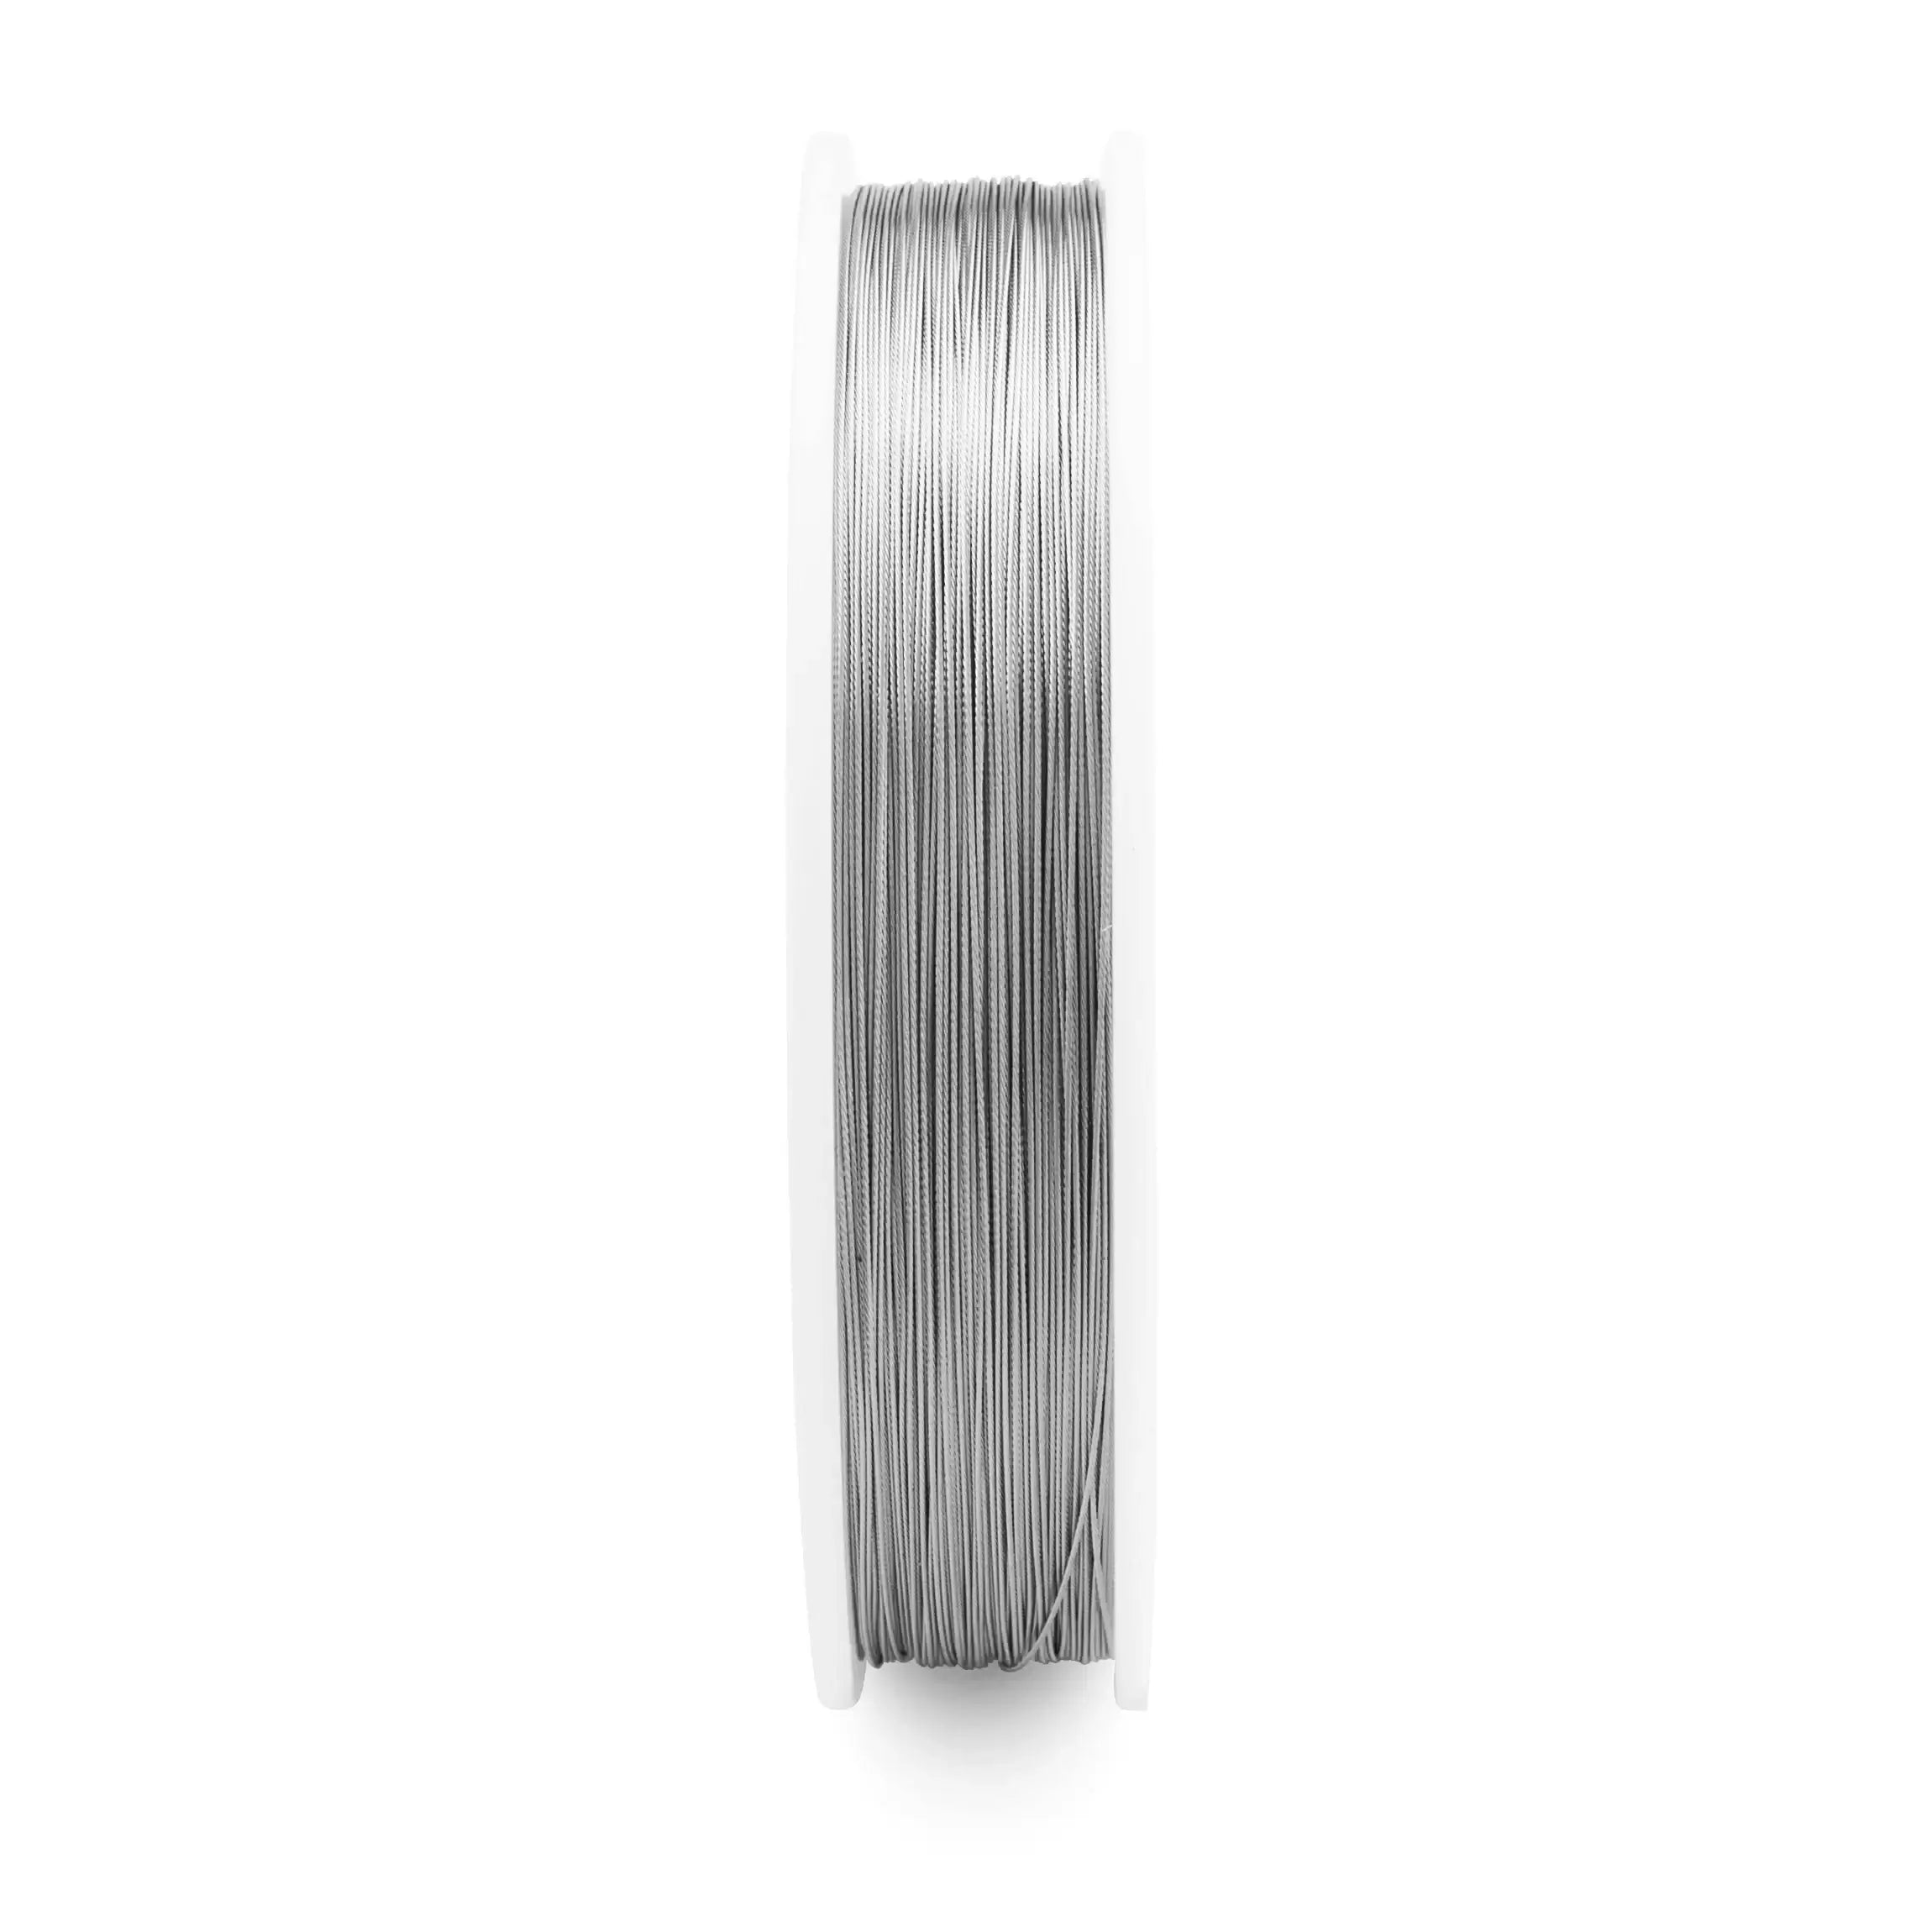 Blood Run Tackle 30lb Stainless Wire 1000